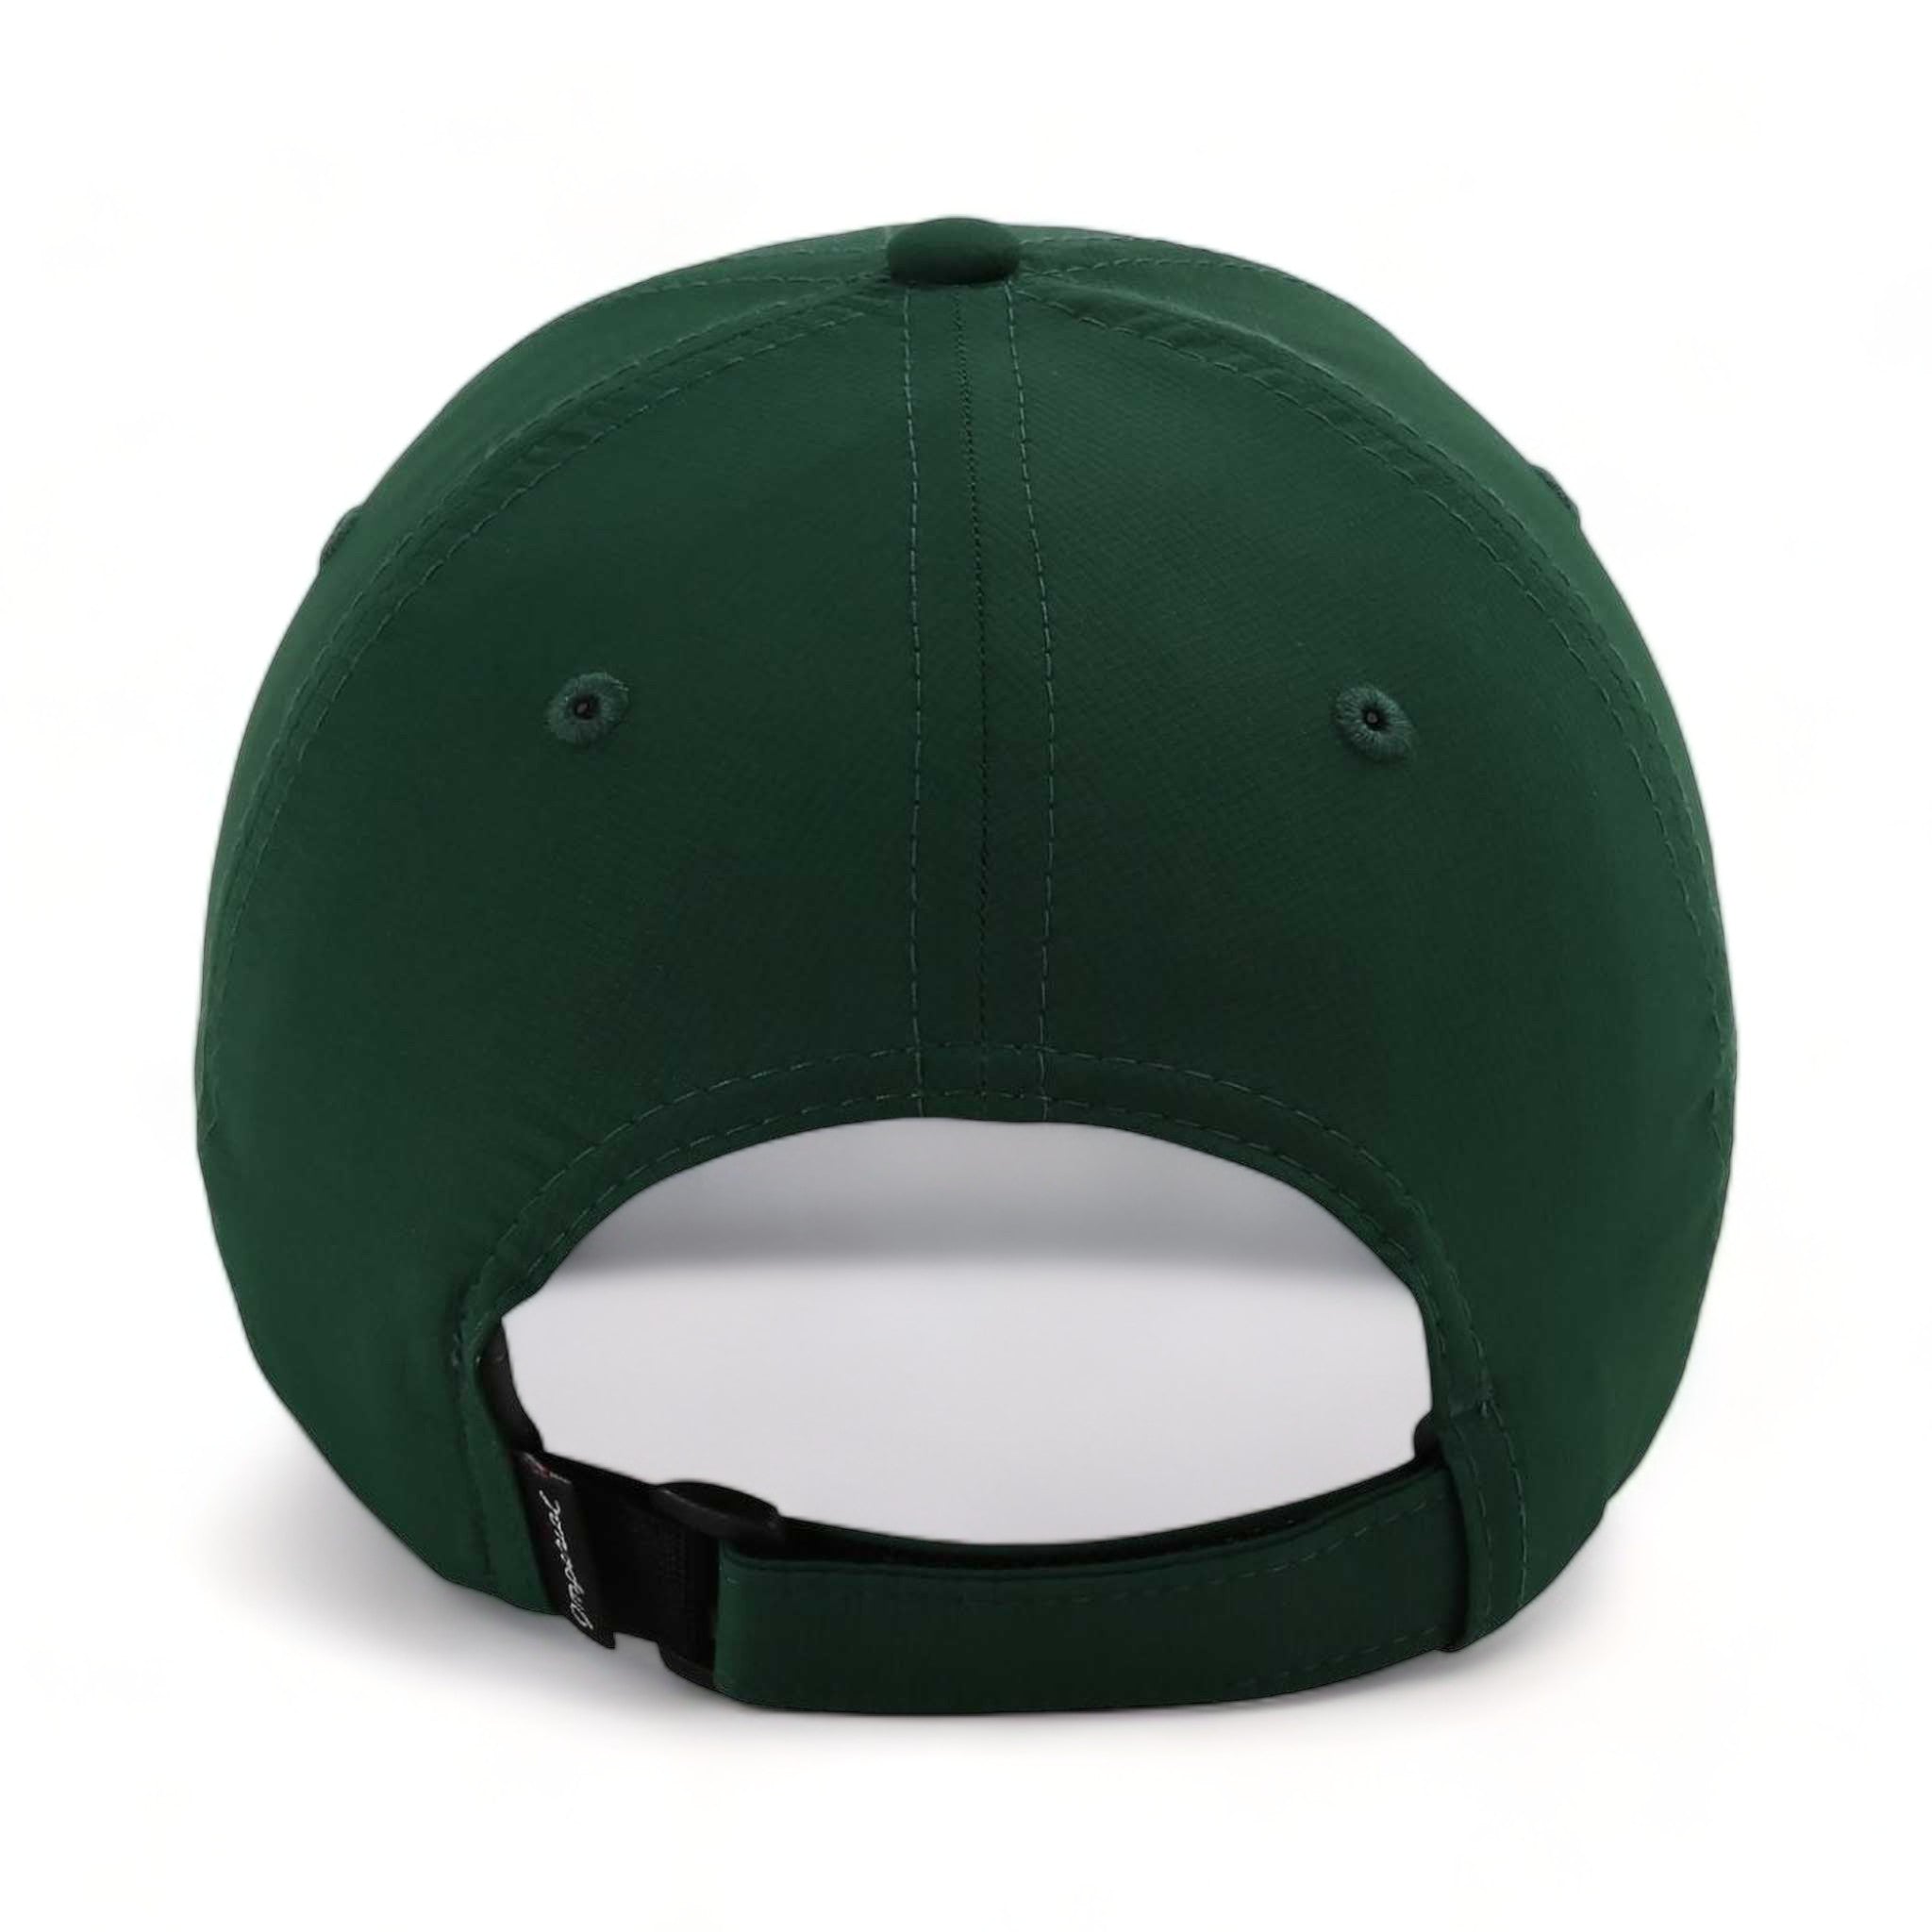 Back view of Imperial X210P custom hat in forest green